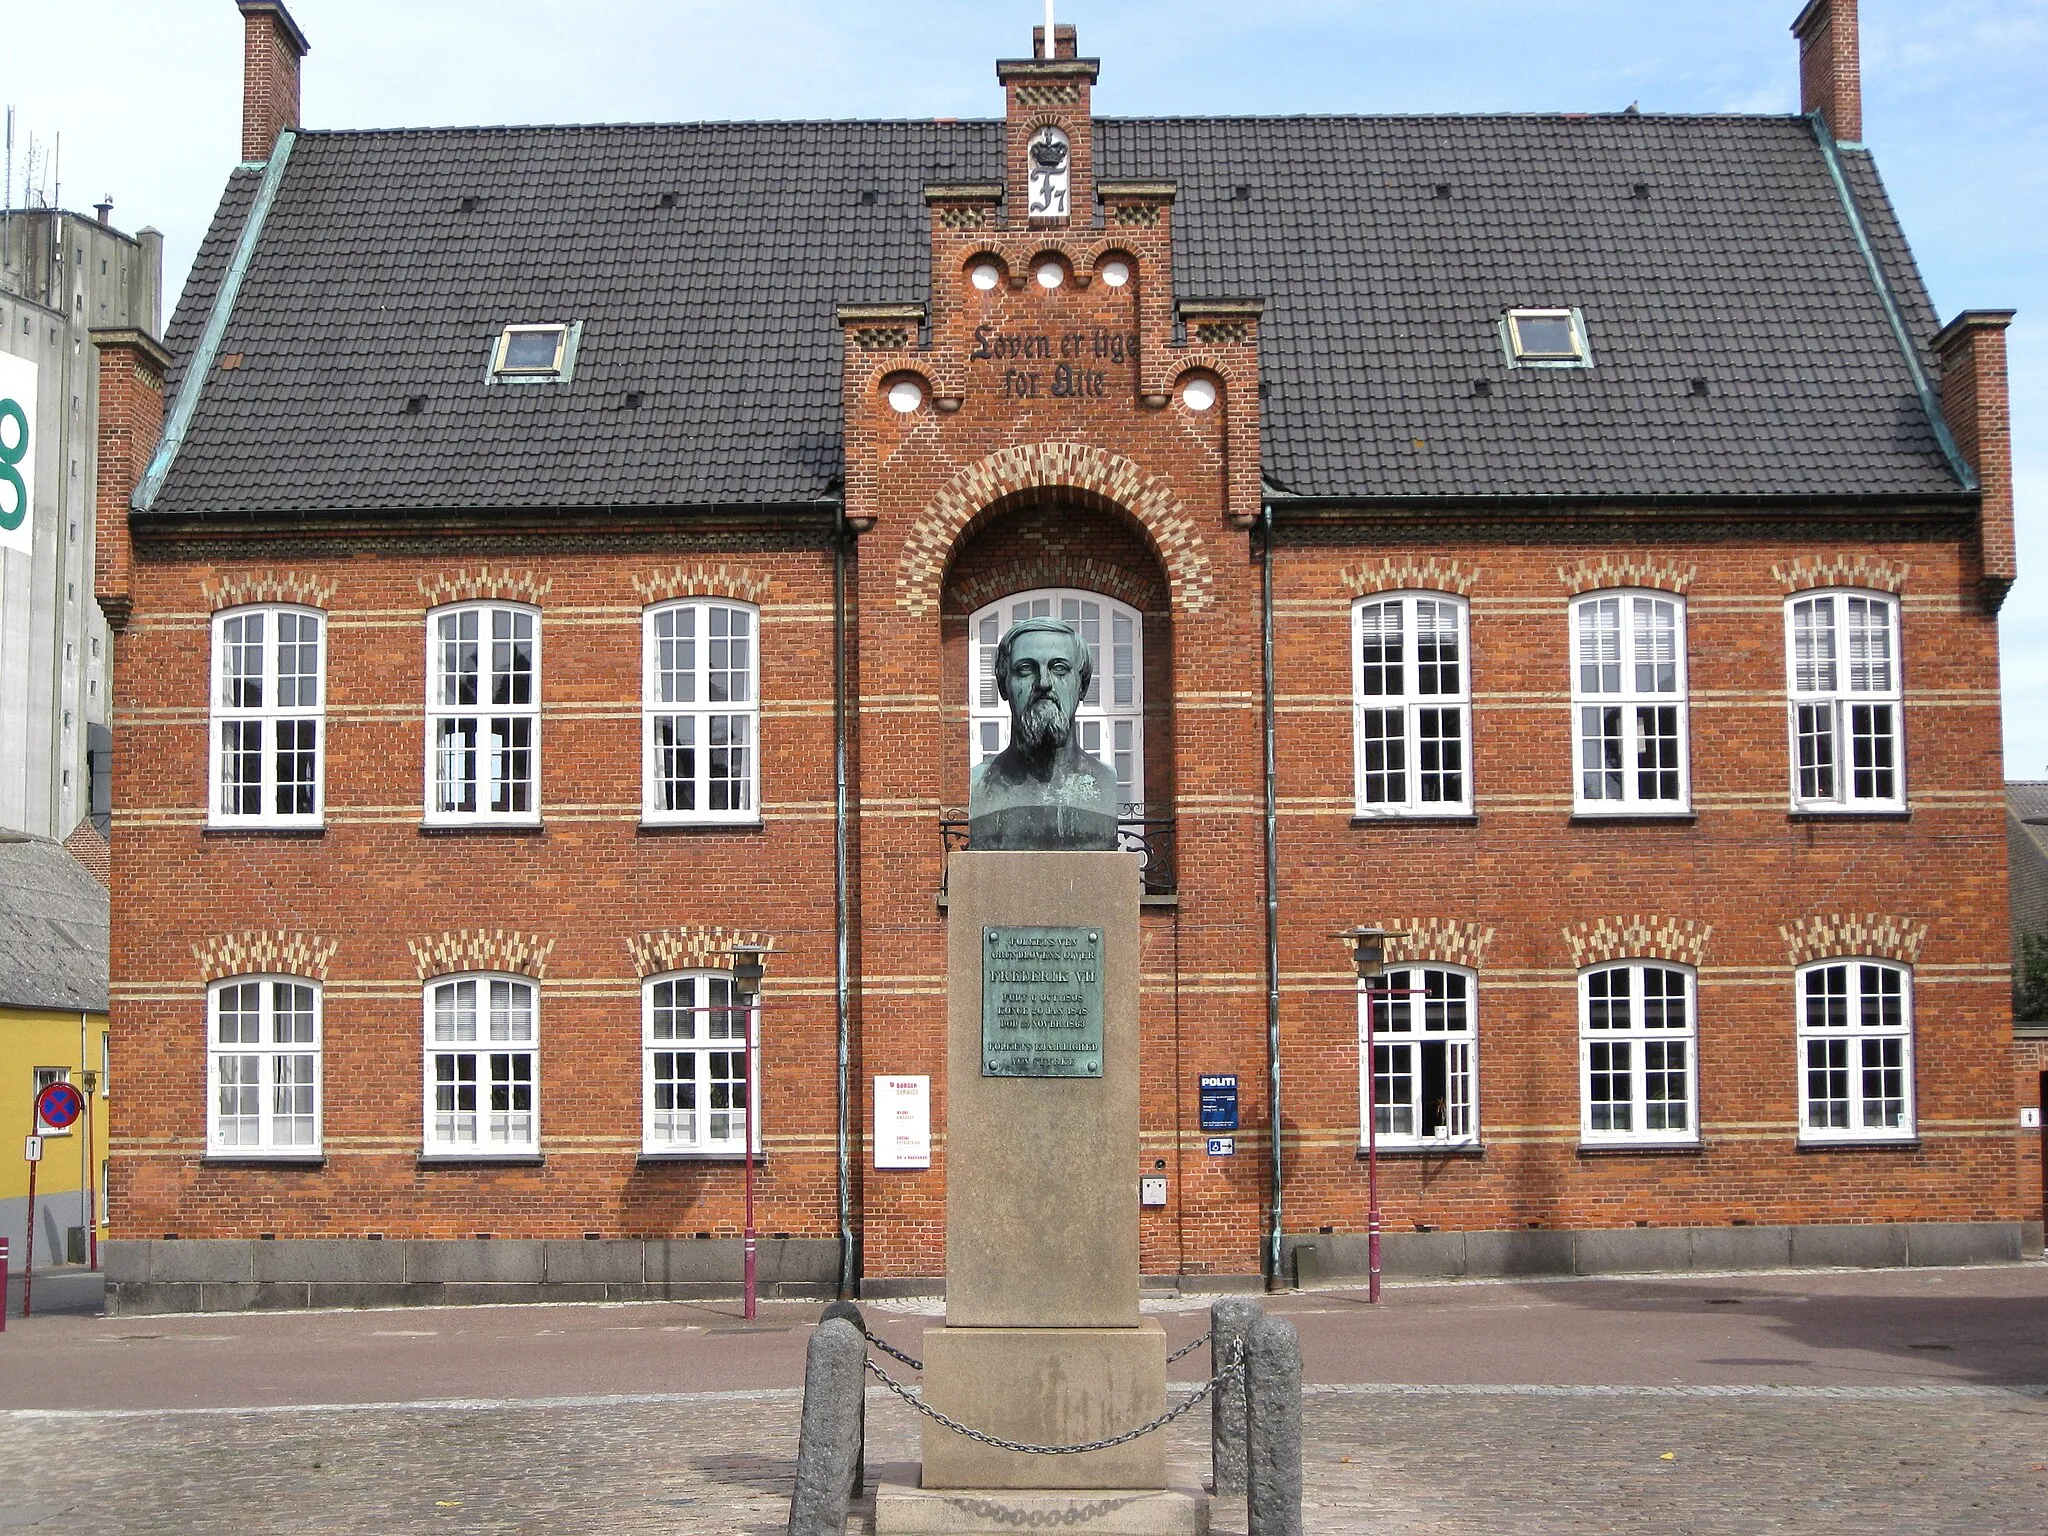 Photo showing: The former town hall "Stubbekøbing Rådhus" (today police station) in the small town "Stubbekøbing". The town is located on the island Falster in east Denmark.